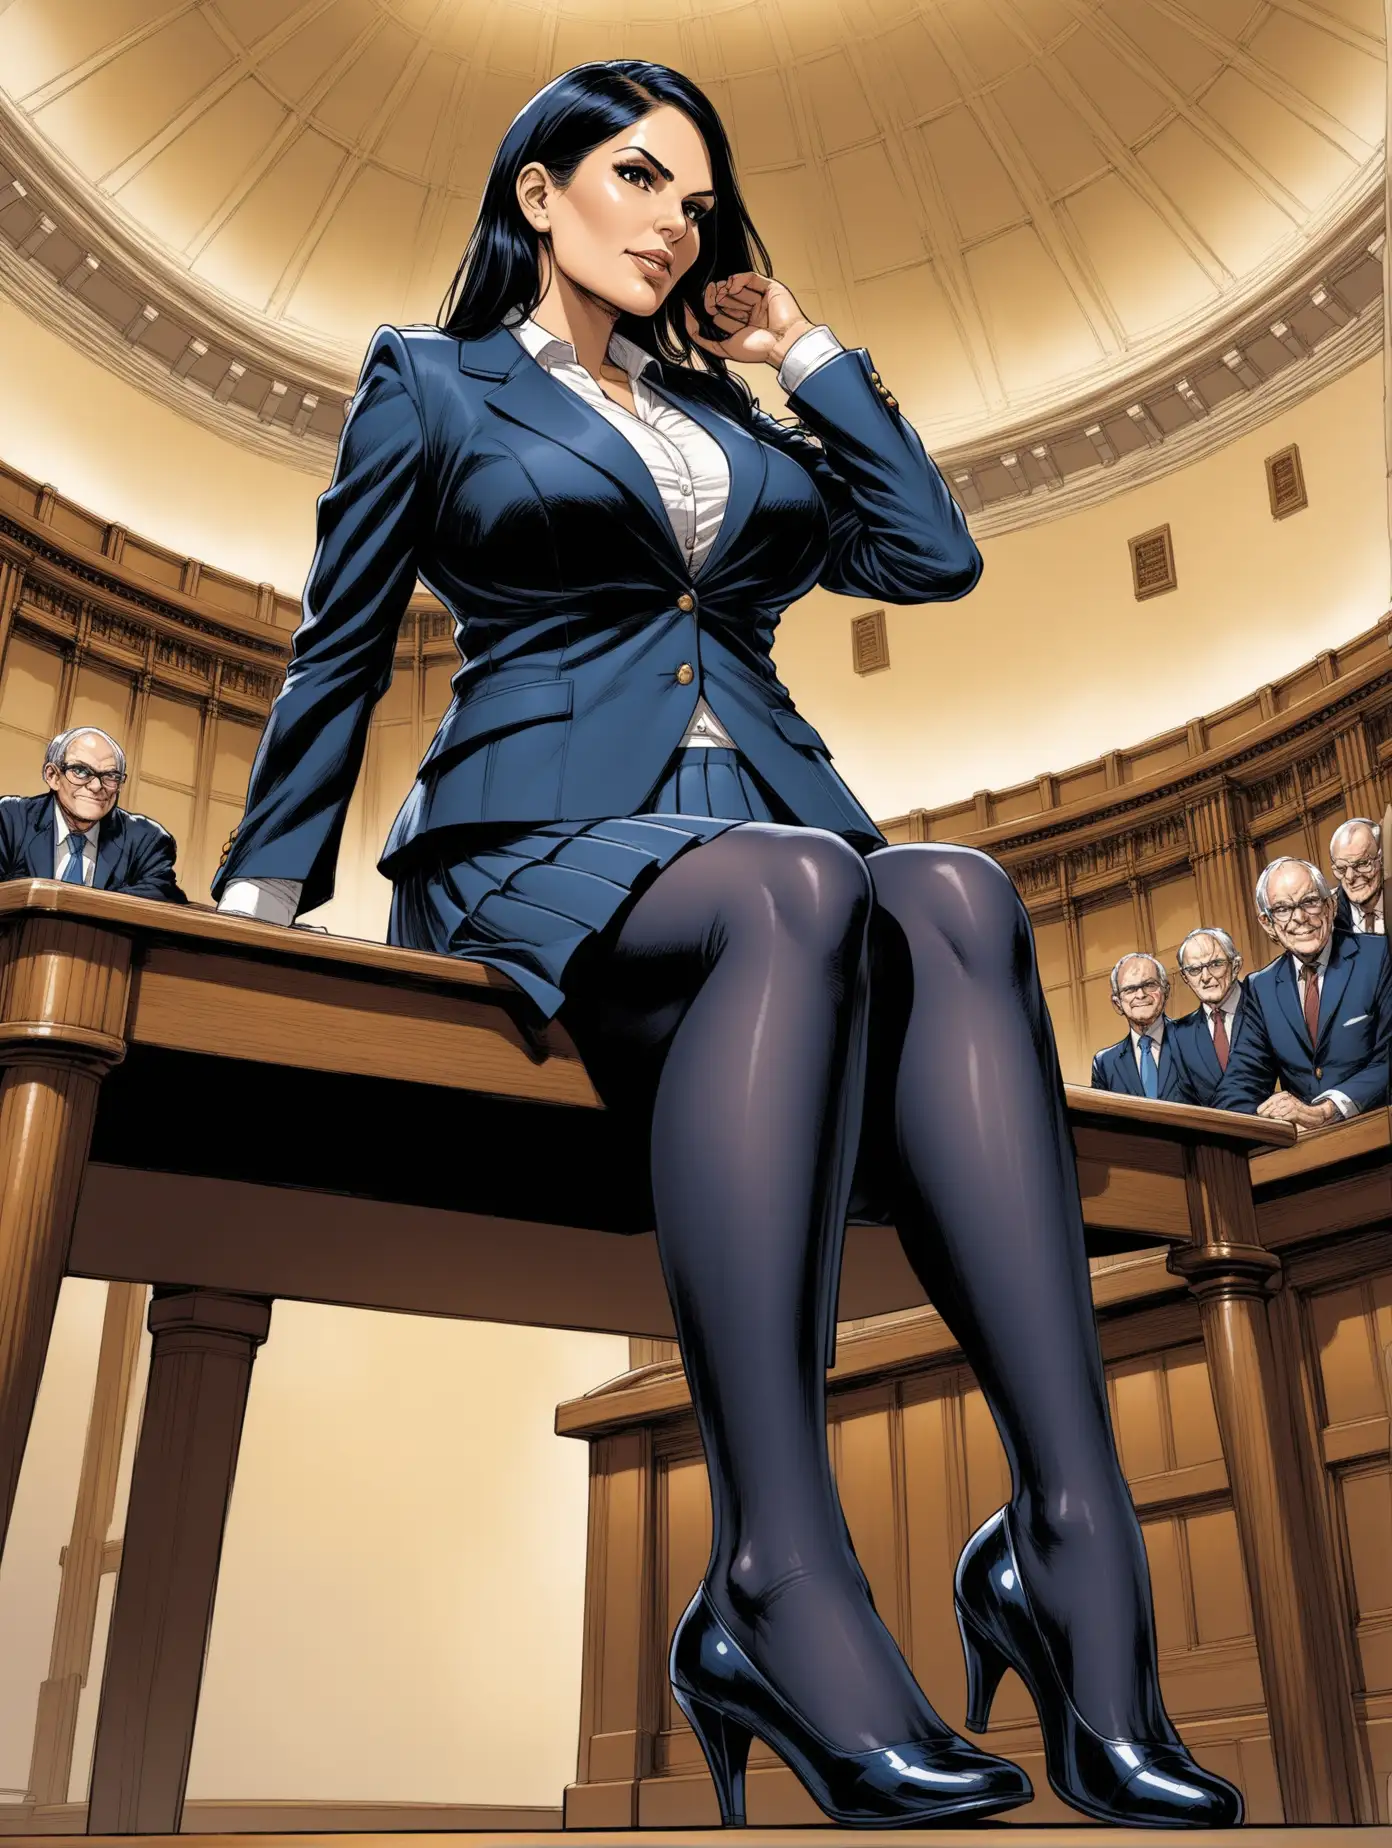 Mature, Priti Patel, dark navy pleated skirt suit [Highly Detailed] Bernie Wrightson art style, navy pantyhose, leg on top of table, parliament, open blazer, intimate setting, removing shoe,  below angle